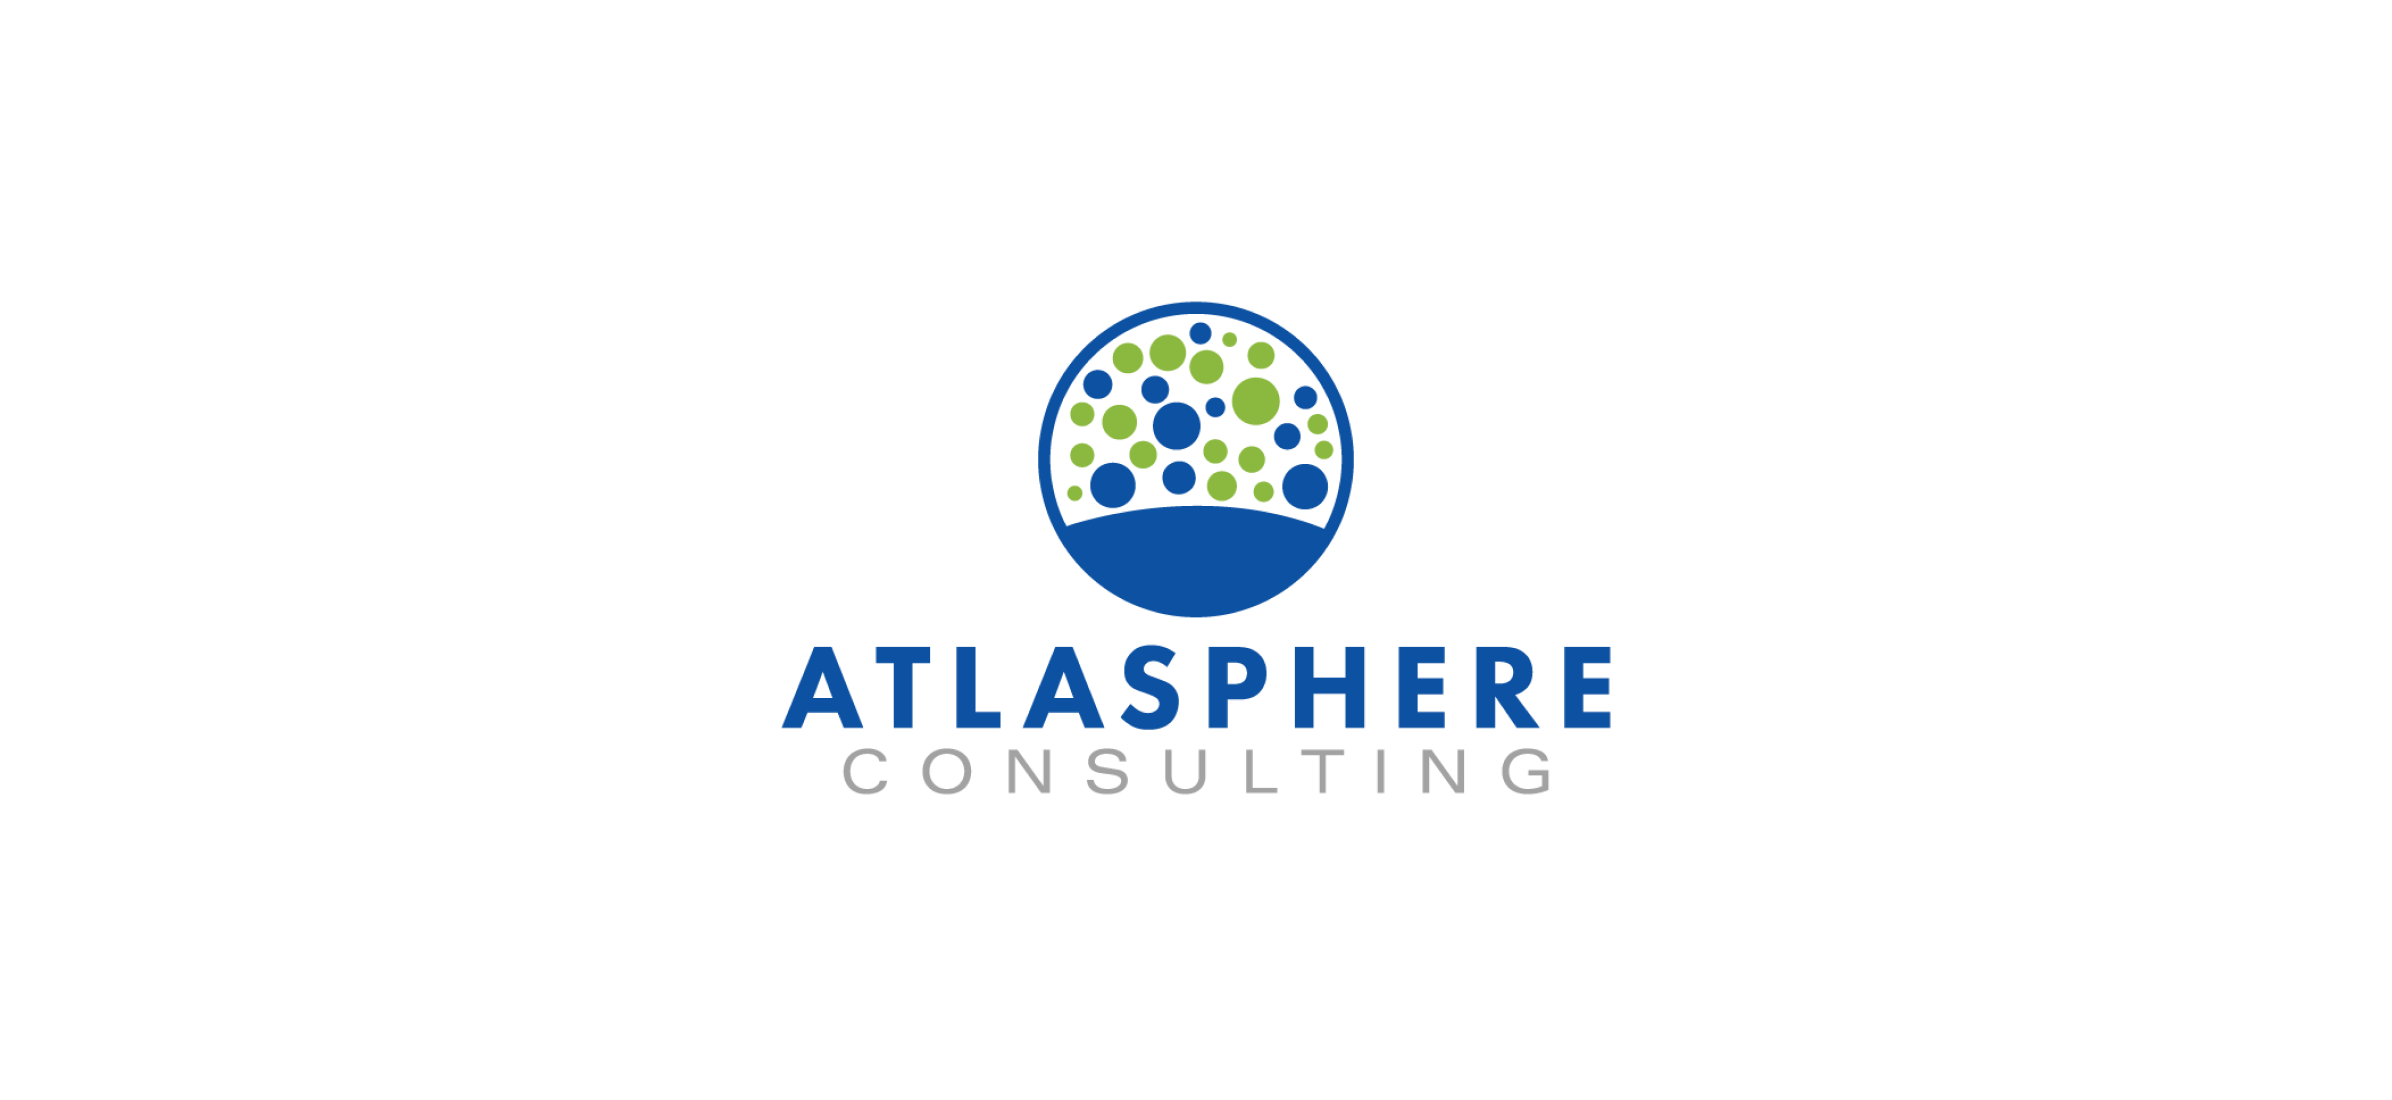 The Atlasphere Consulting logo